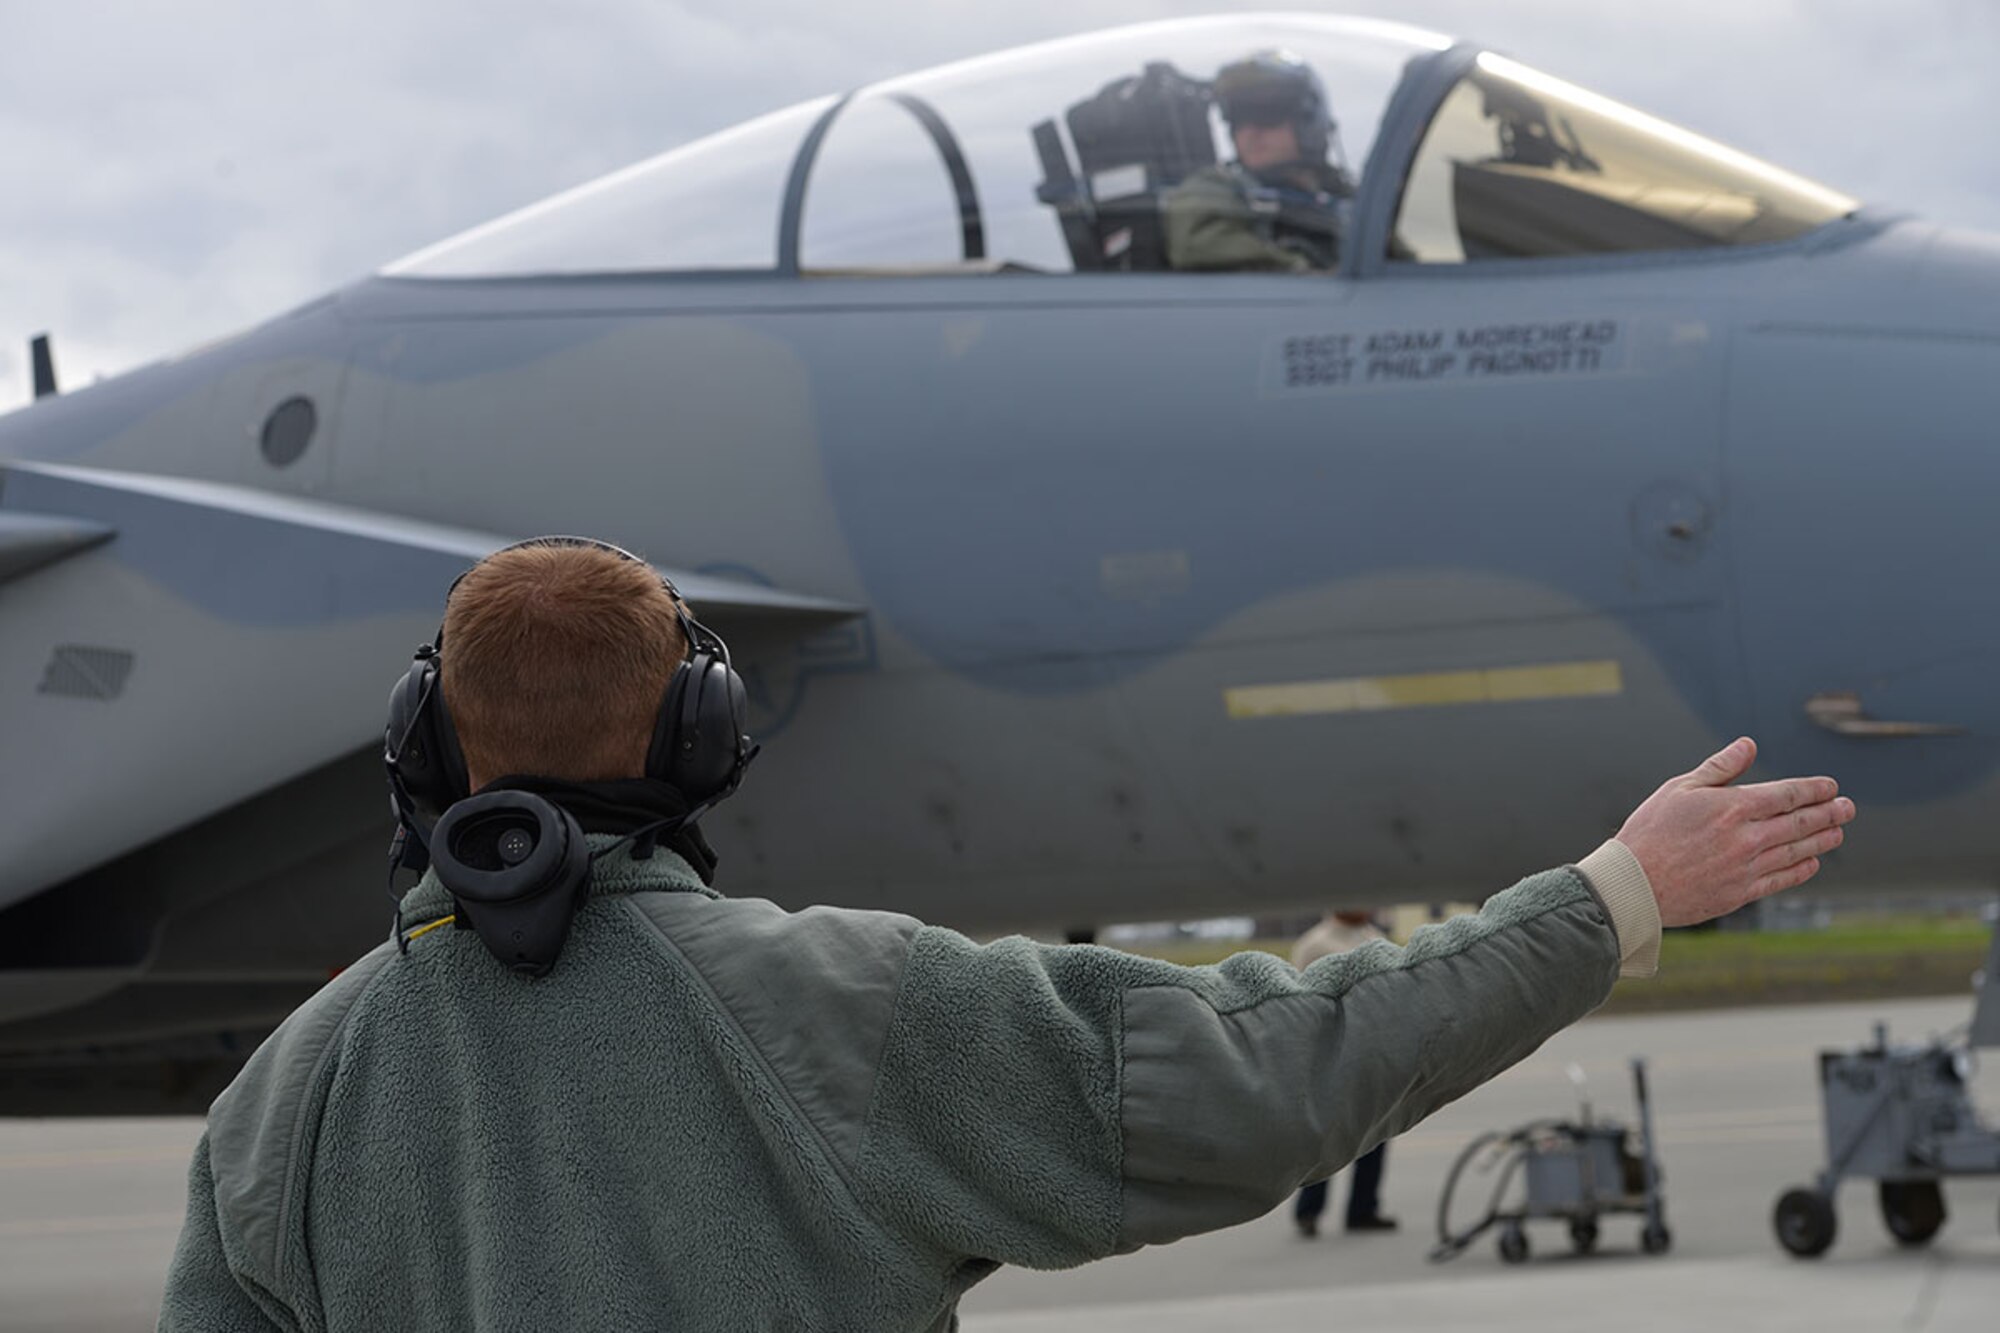 Air Force Staff Sgt. Austin Hamilton, 96th Aircraft Maintenance Squadron F-15 crew chief, from Eglin Air Force Base, Fla., signals an F-15 Eagle pilot while preparing departure on the Joint Base Elmendorf-Richardson flightline, May 3, 2016. Hamilton is deployed to JBER as part of Red Flag-Alaska, a Pacific Air Forces commander-directed field training exercises for U.S. and international forces, providing combined offensive counter-air, interdiction, close air support and large force employment training in a simulated combat environment. (U.S. Air Force photo by Airman 1st Class Javier Alvarez)